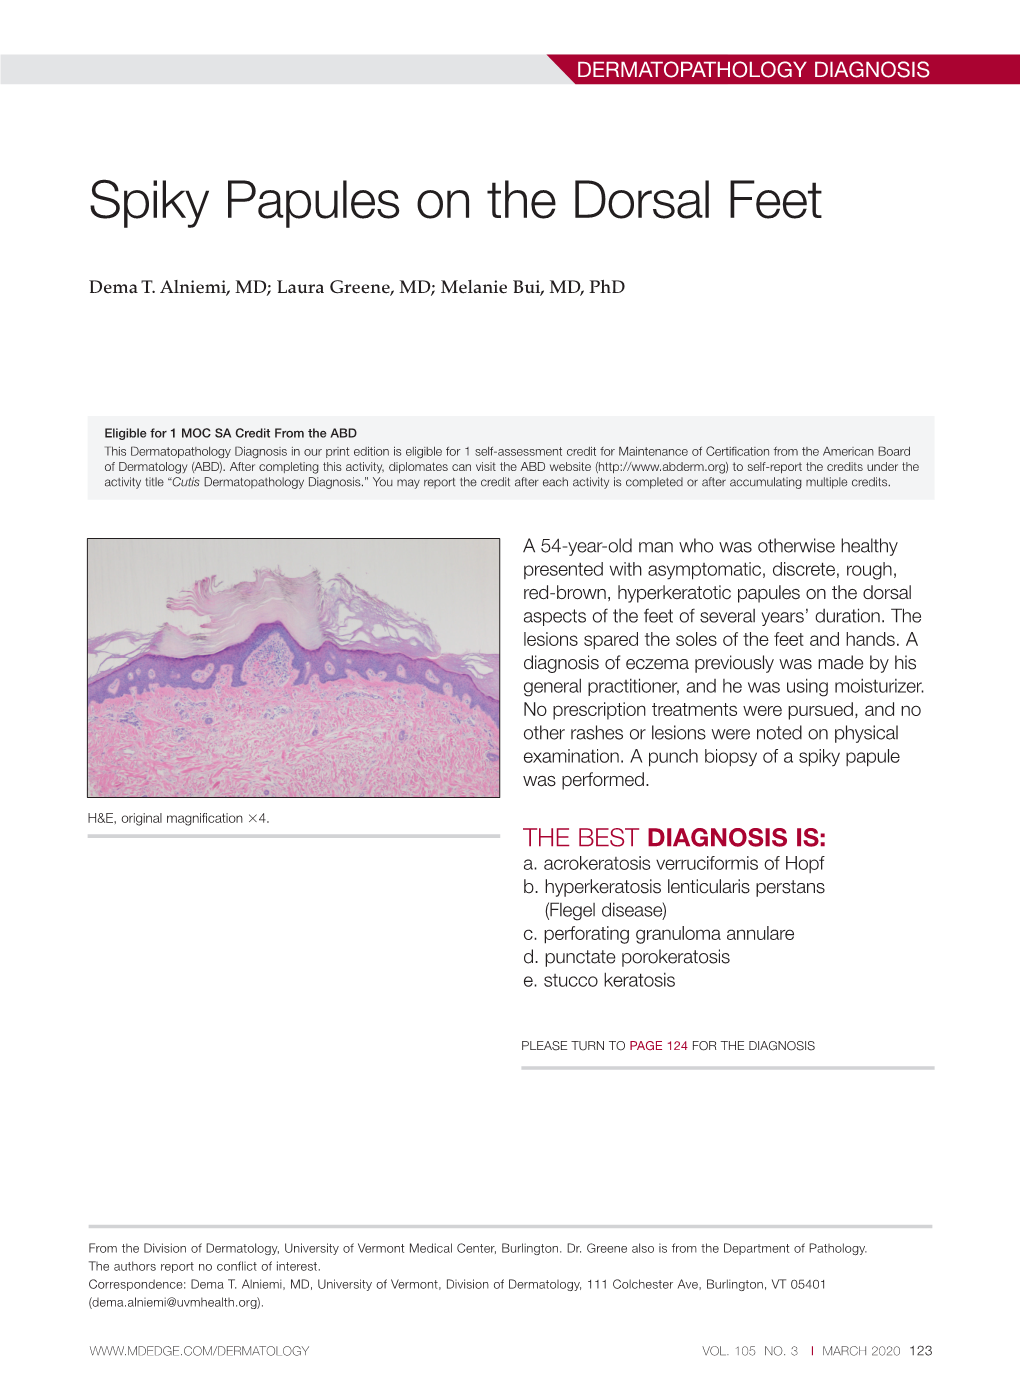 Spiky Papules on the Dorsal Feet